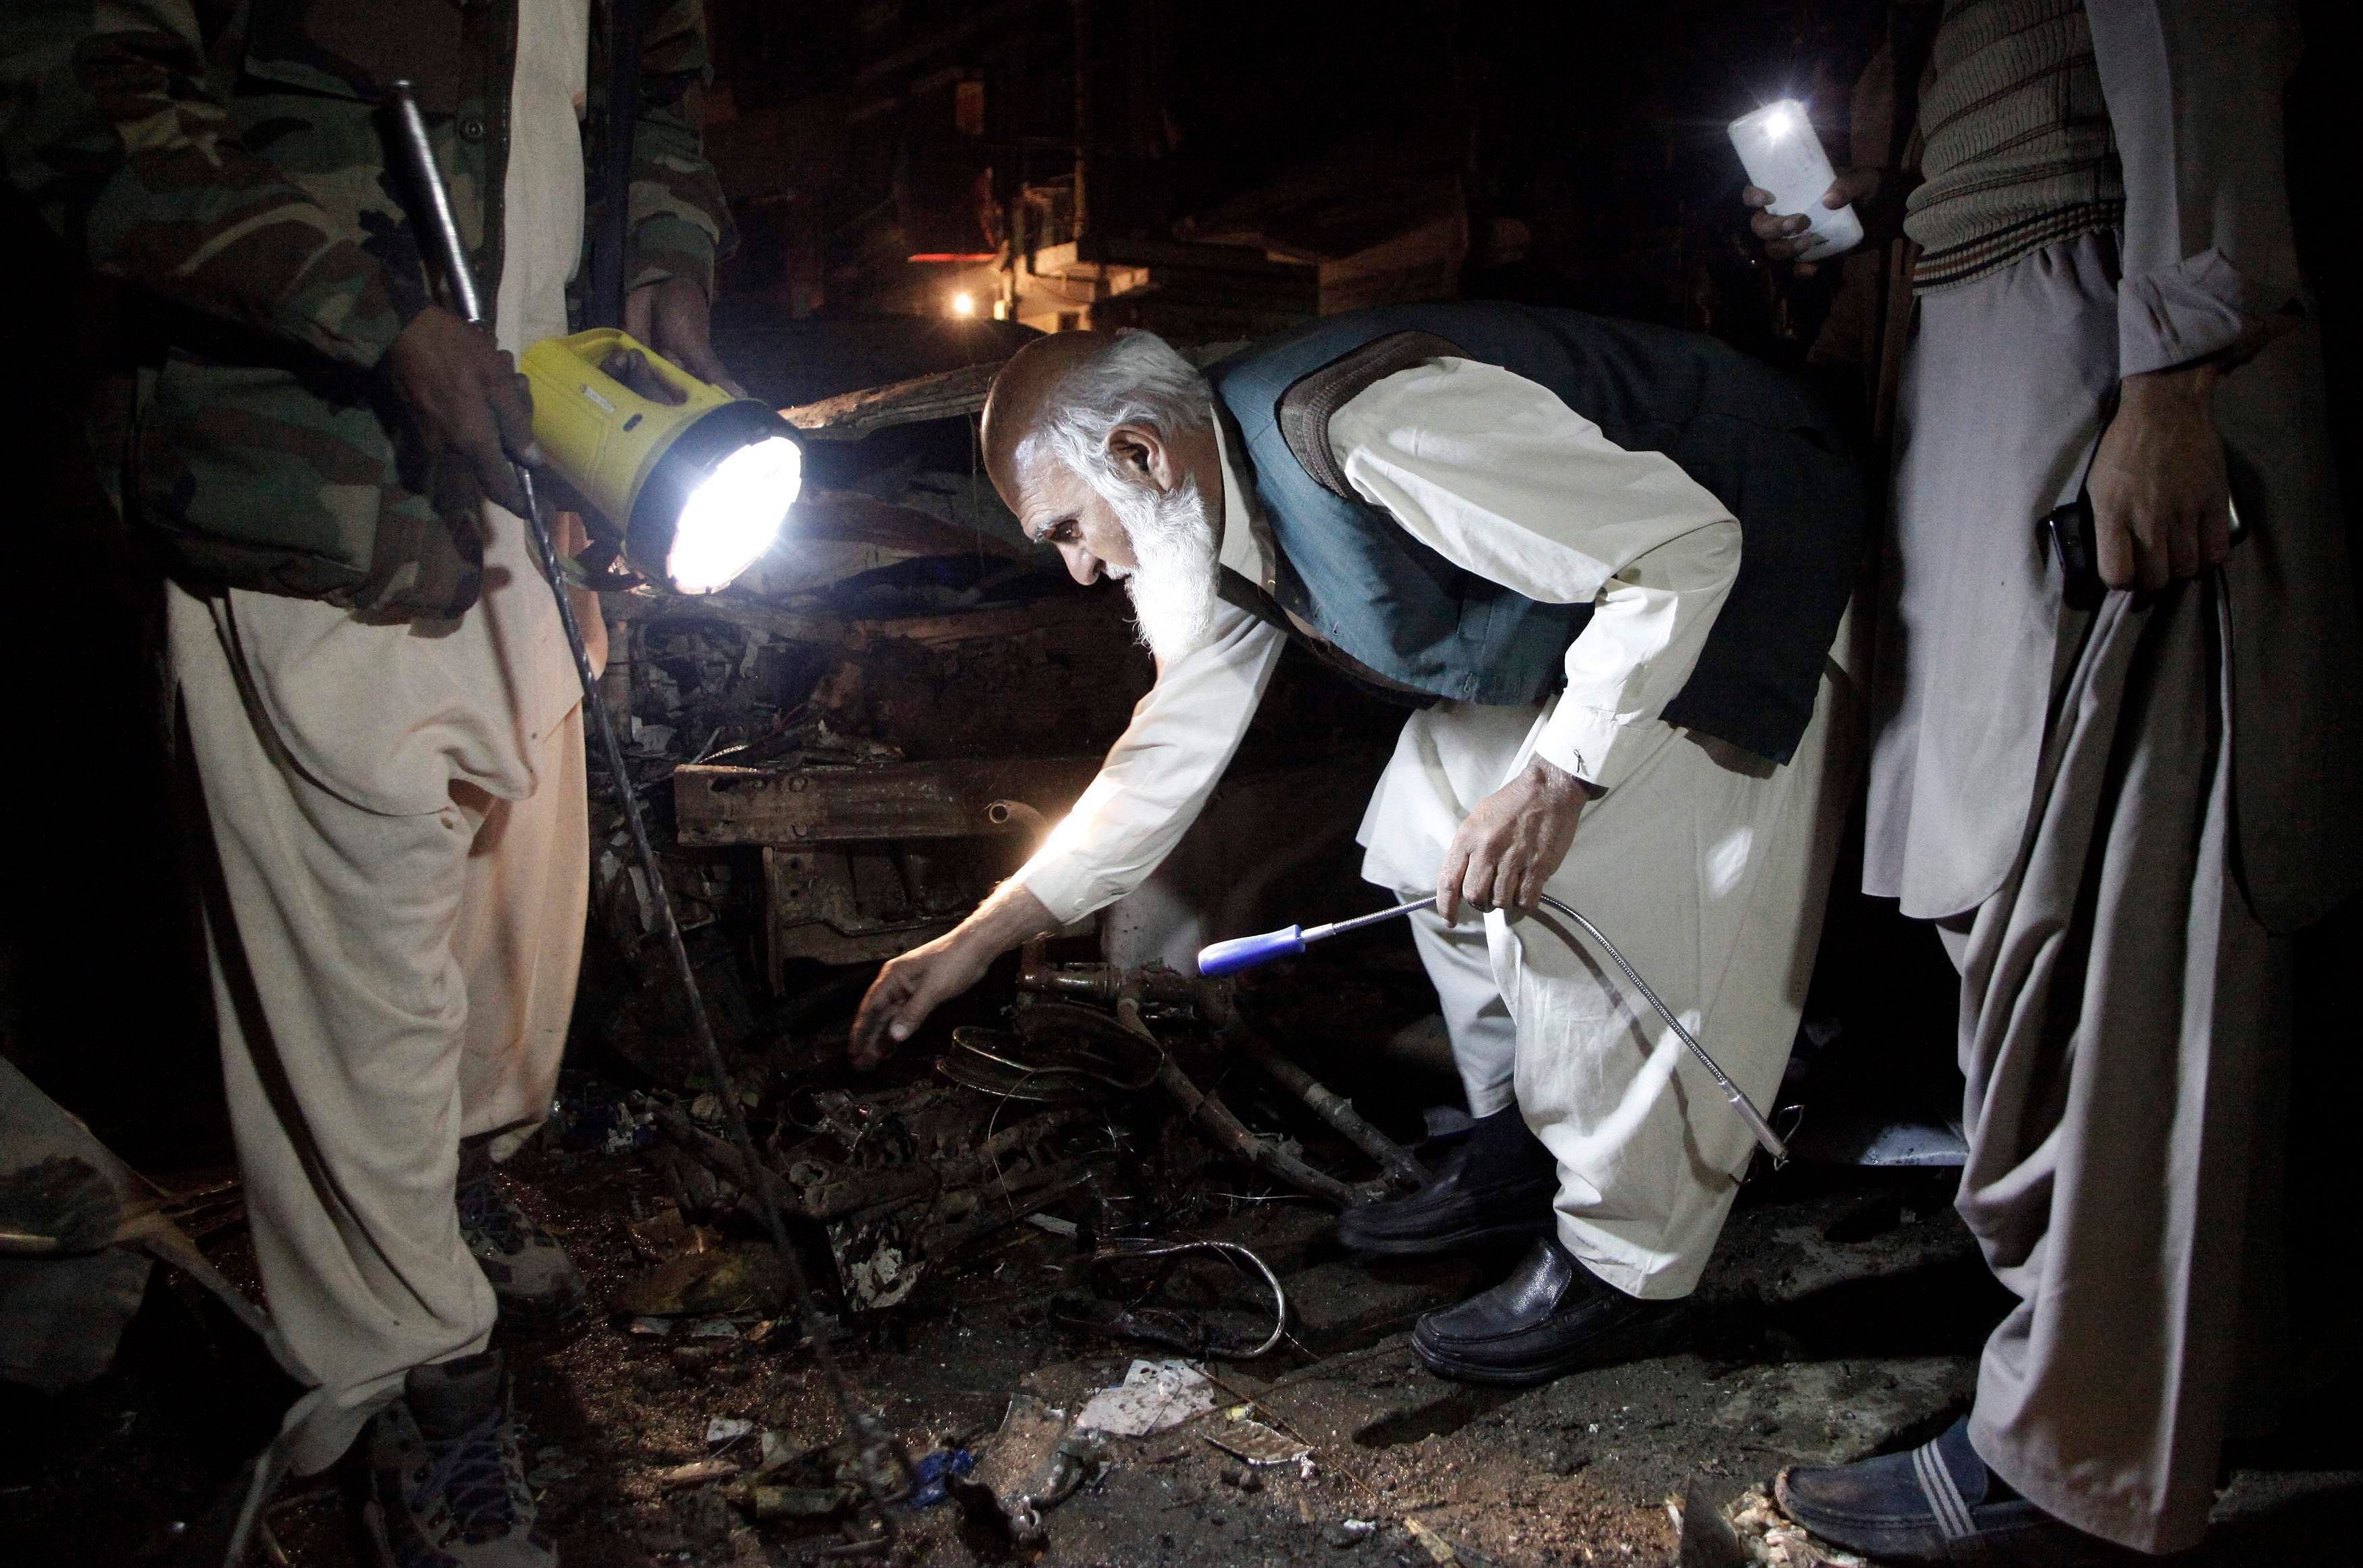 A security officer collects evidence from the site of an explosion in Quetta December 24, 2014. Photo: Reuters